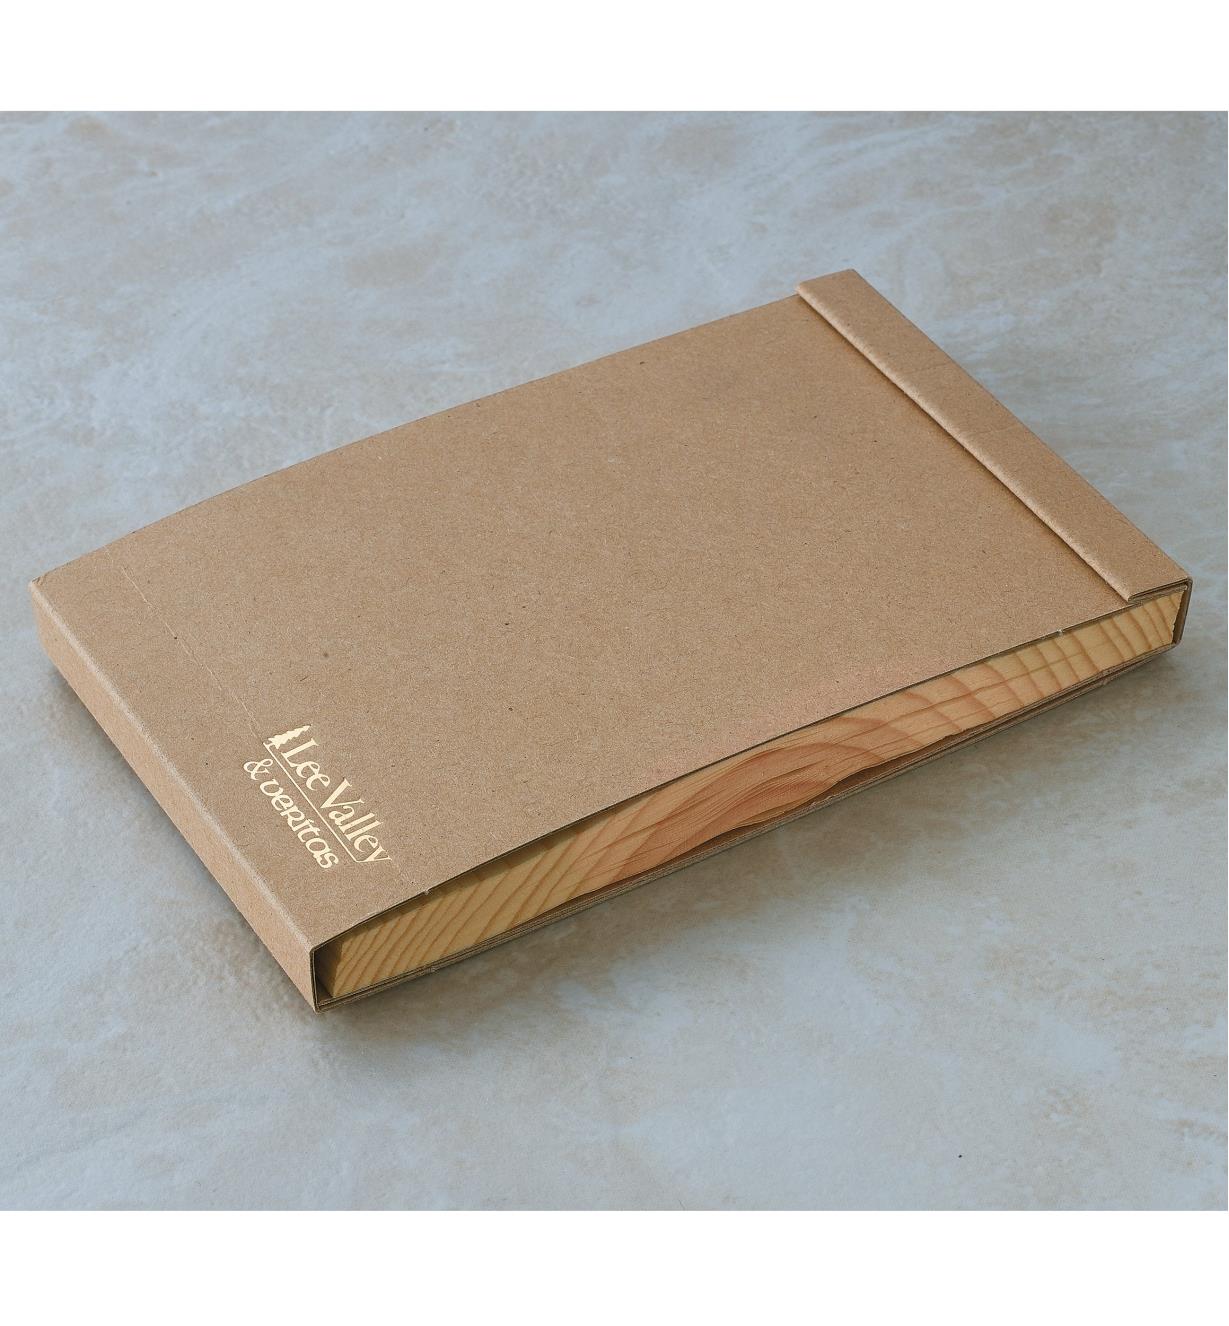 3" x 4" Wooden Kyougi Notepad with the cover closed